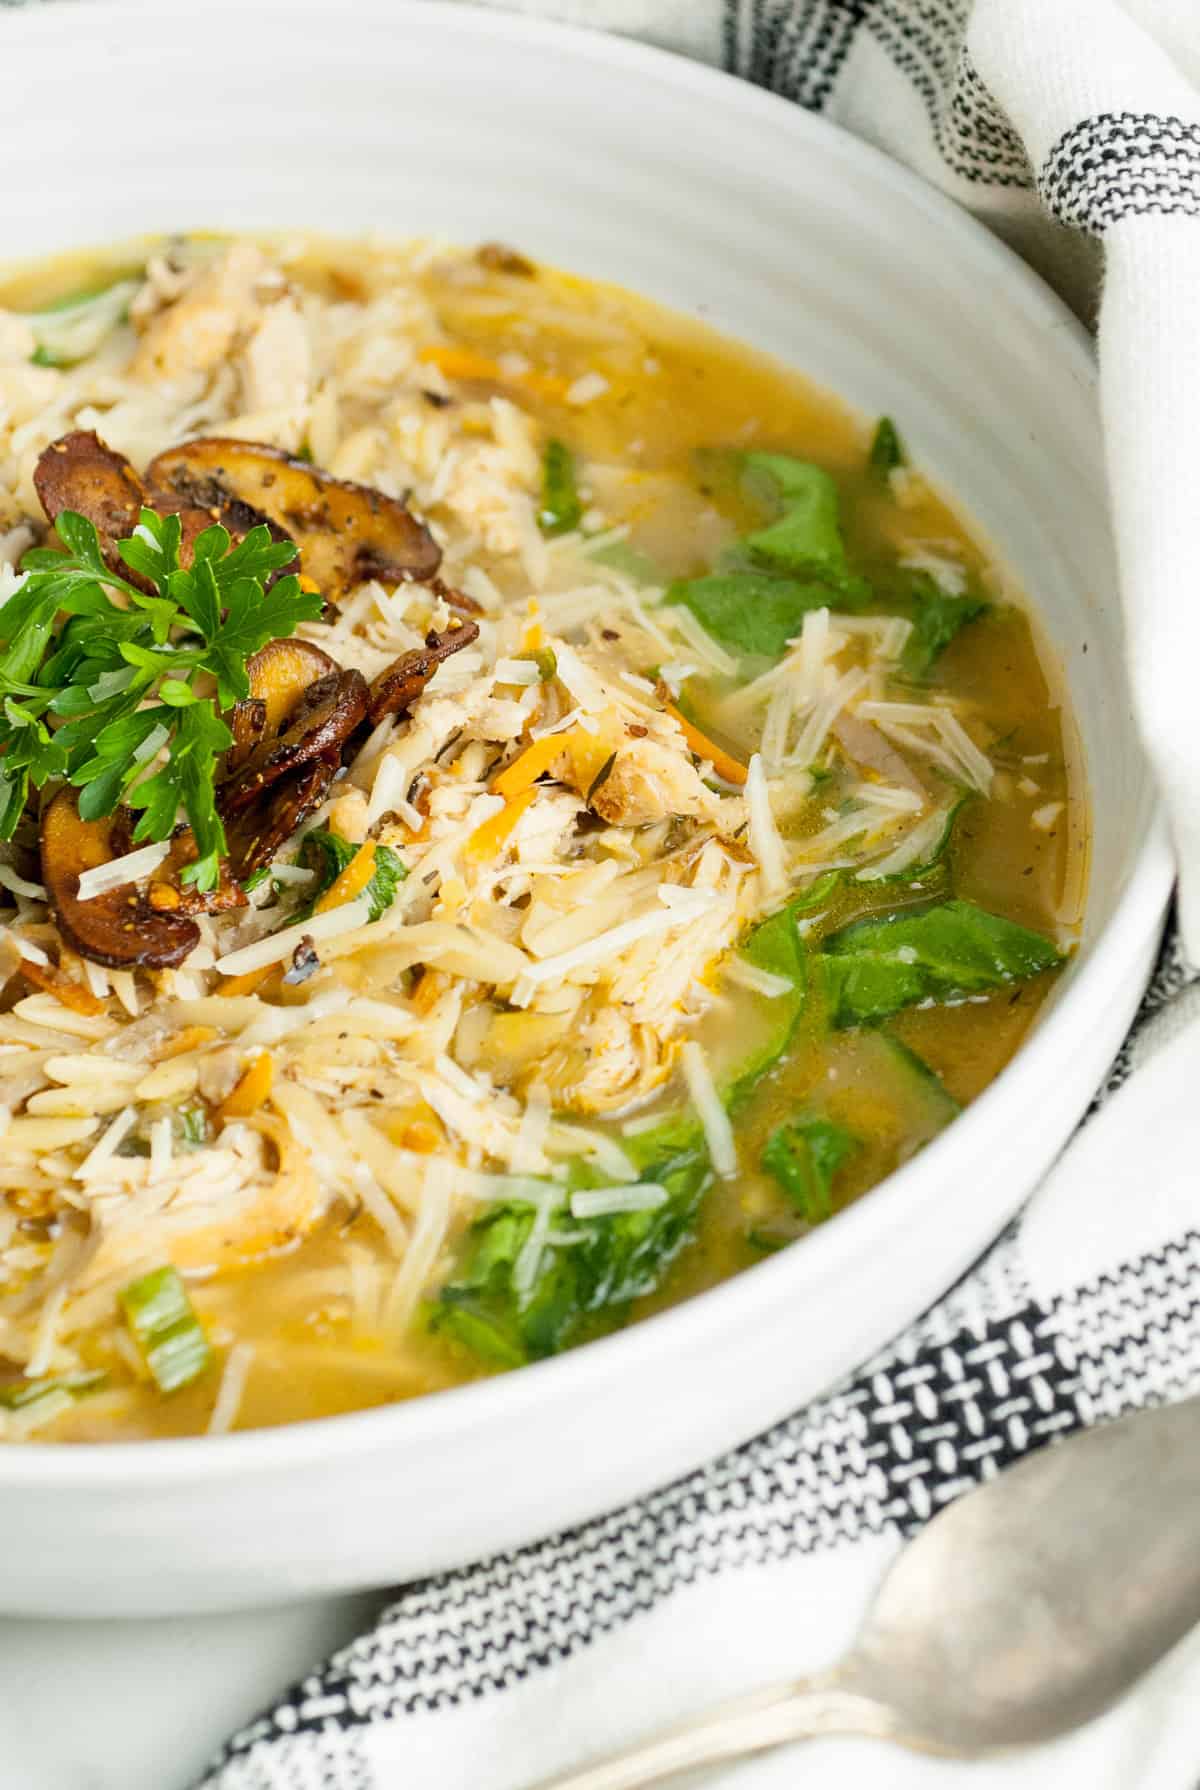 Lemon chicken orzo soup in a white bowl topped with parsley and fried mushrooms.